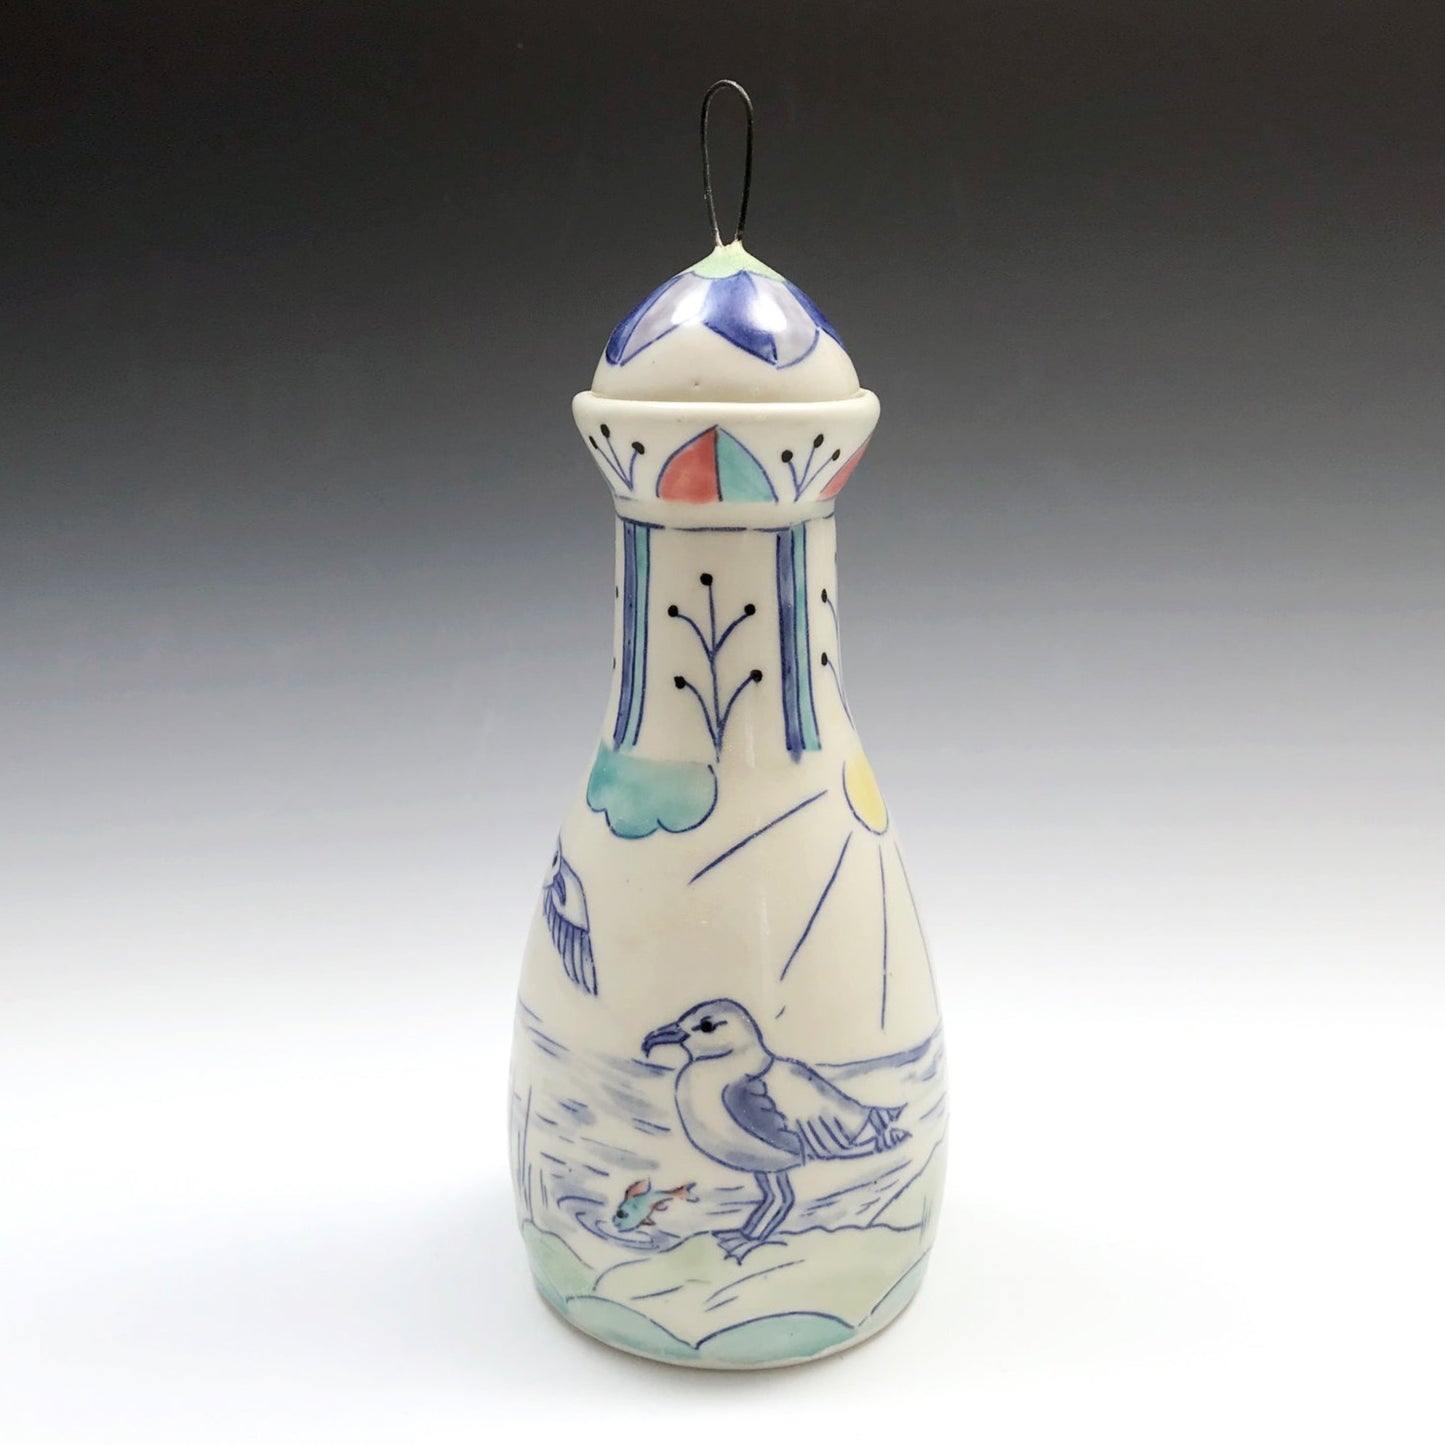 Bottle with seaguls